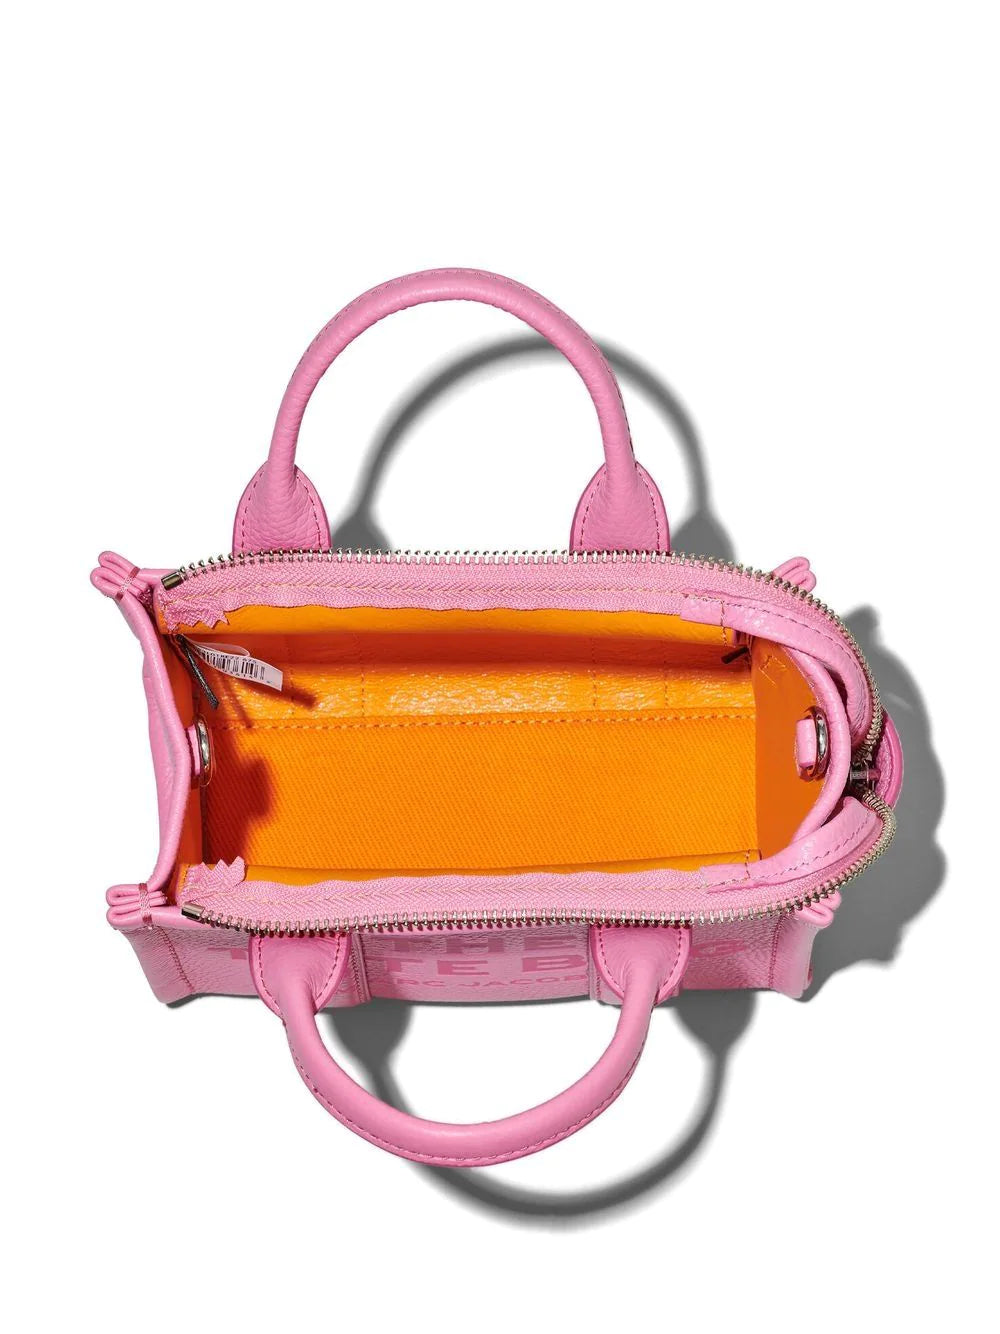 Marc Jacobs The Micro Tote Bag In 675 Candy Pink | ModeSens